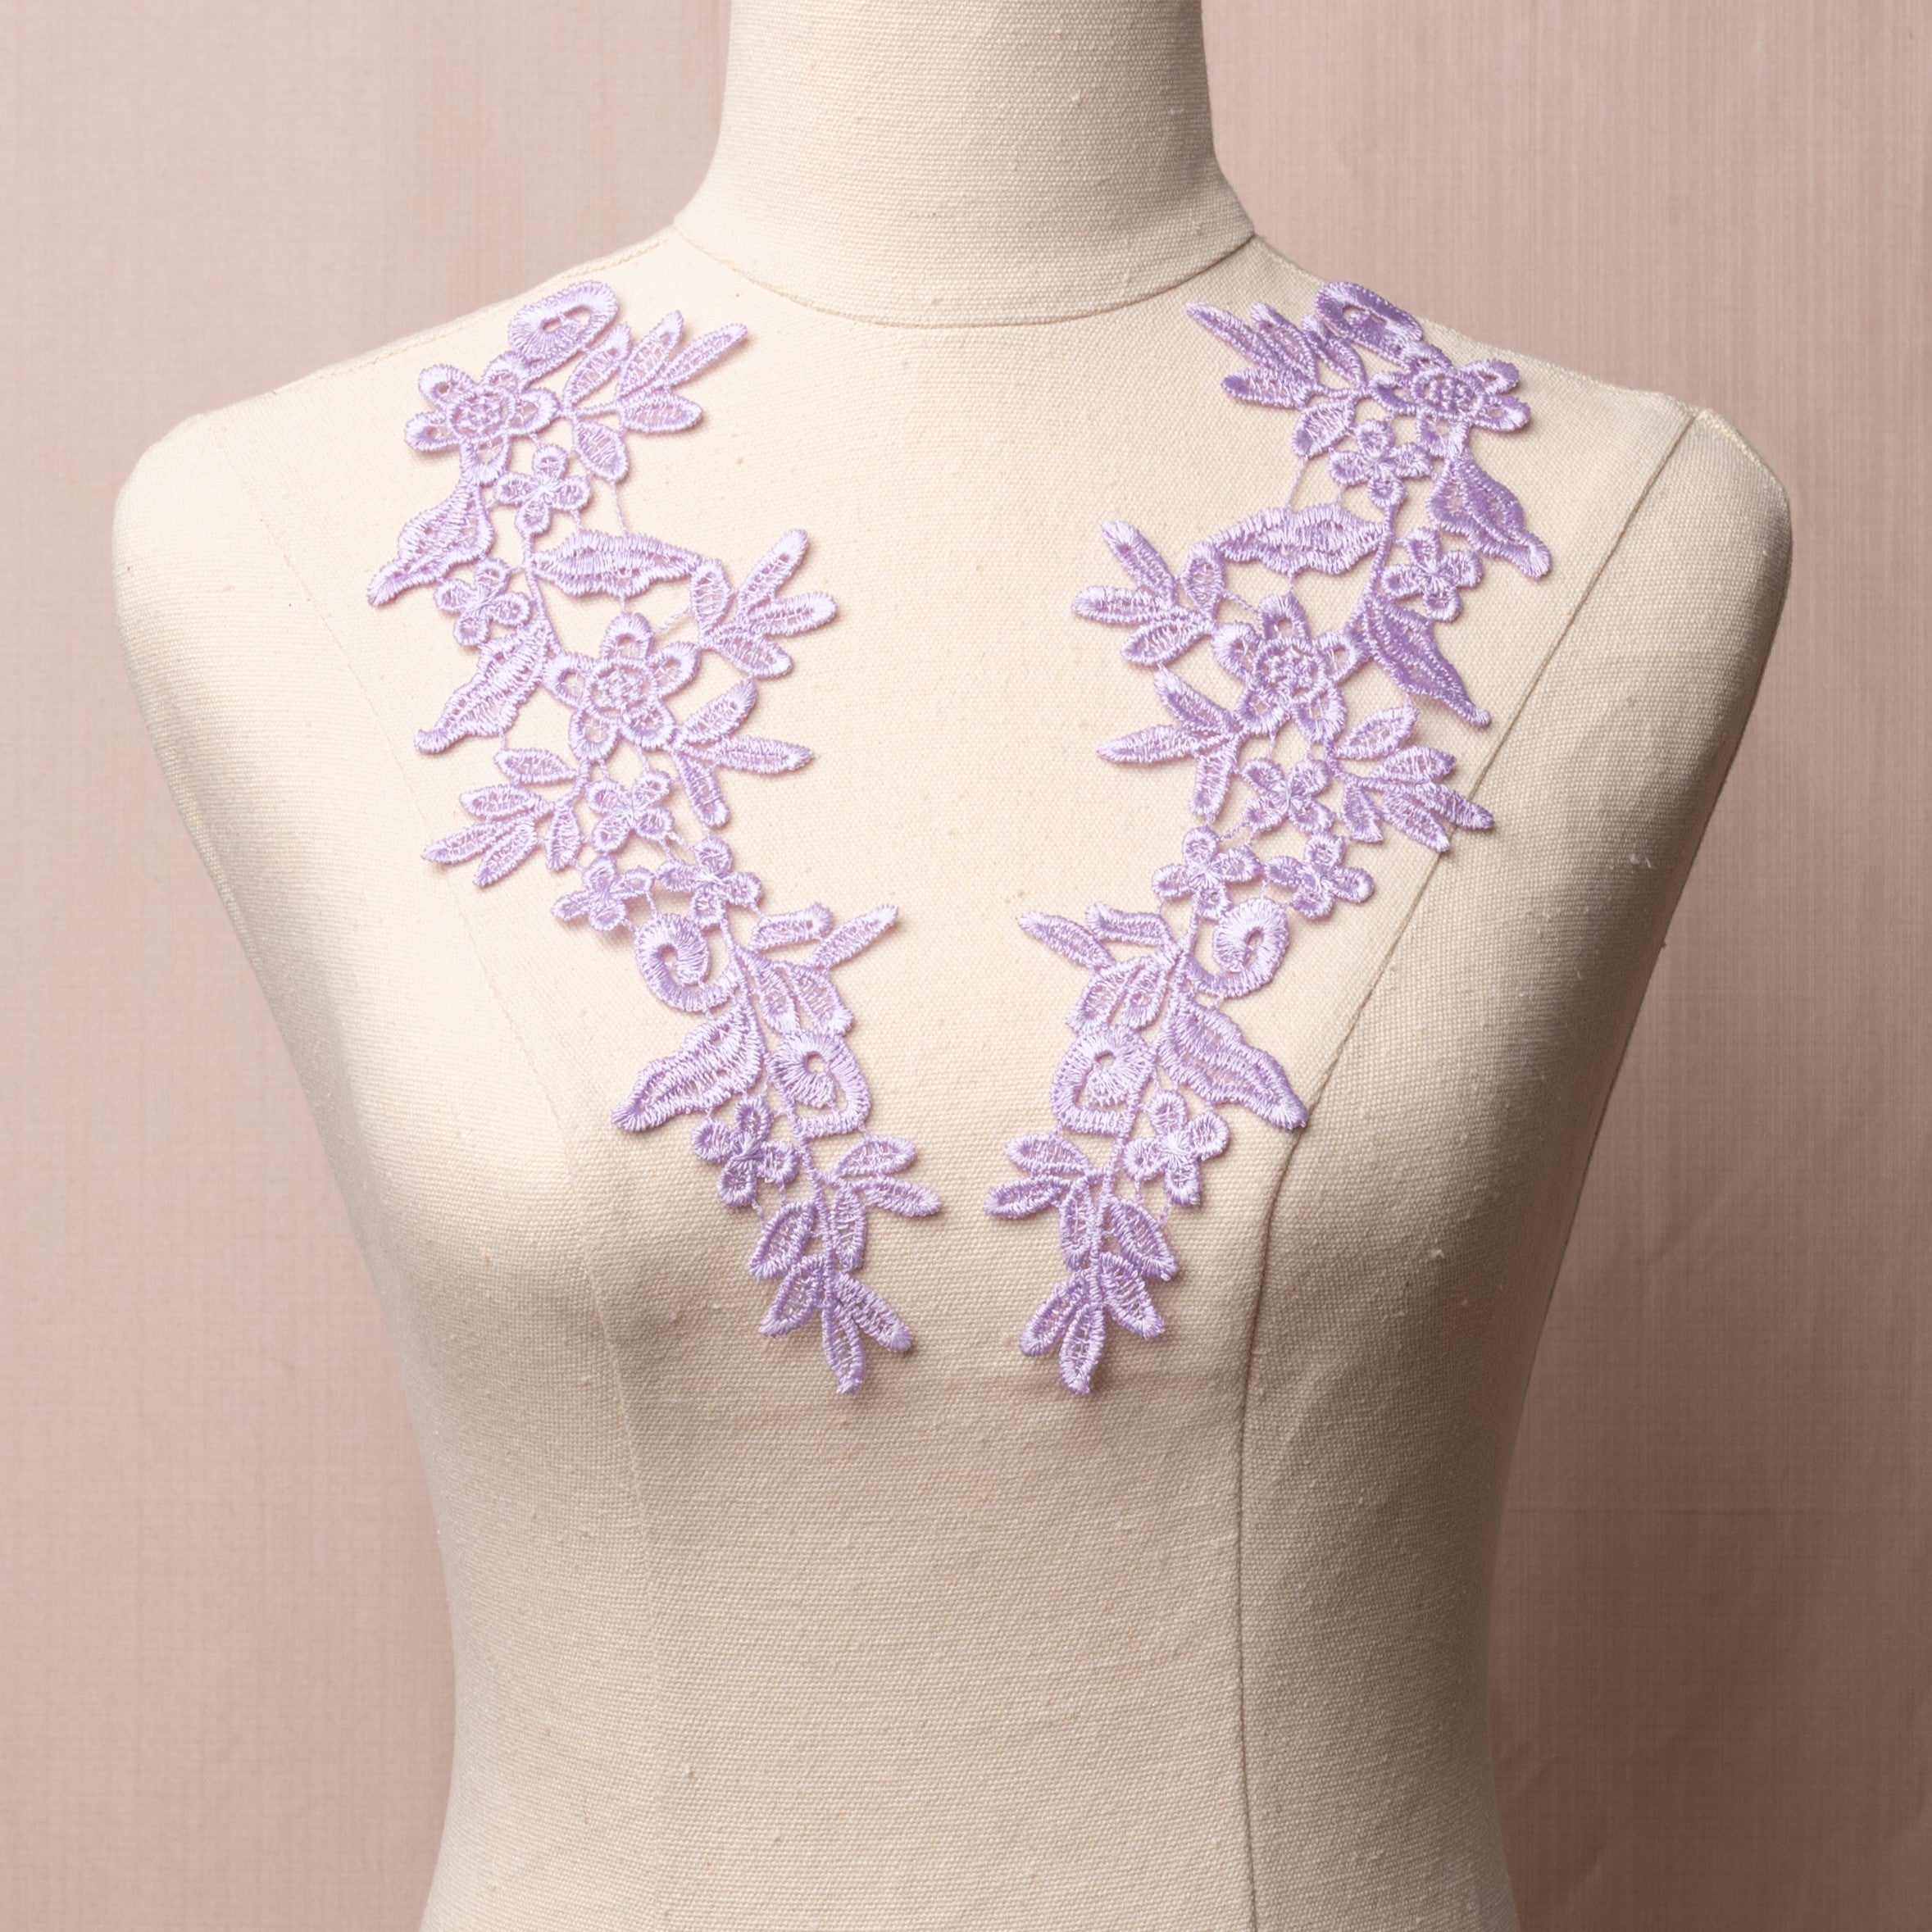 Heavily embroidered lilac lace applique pair with a floral design displayed on a mannequin.